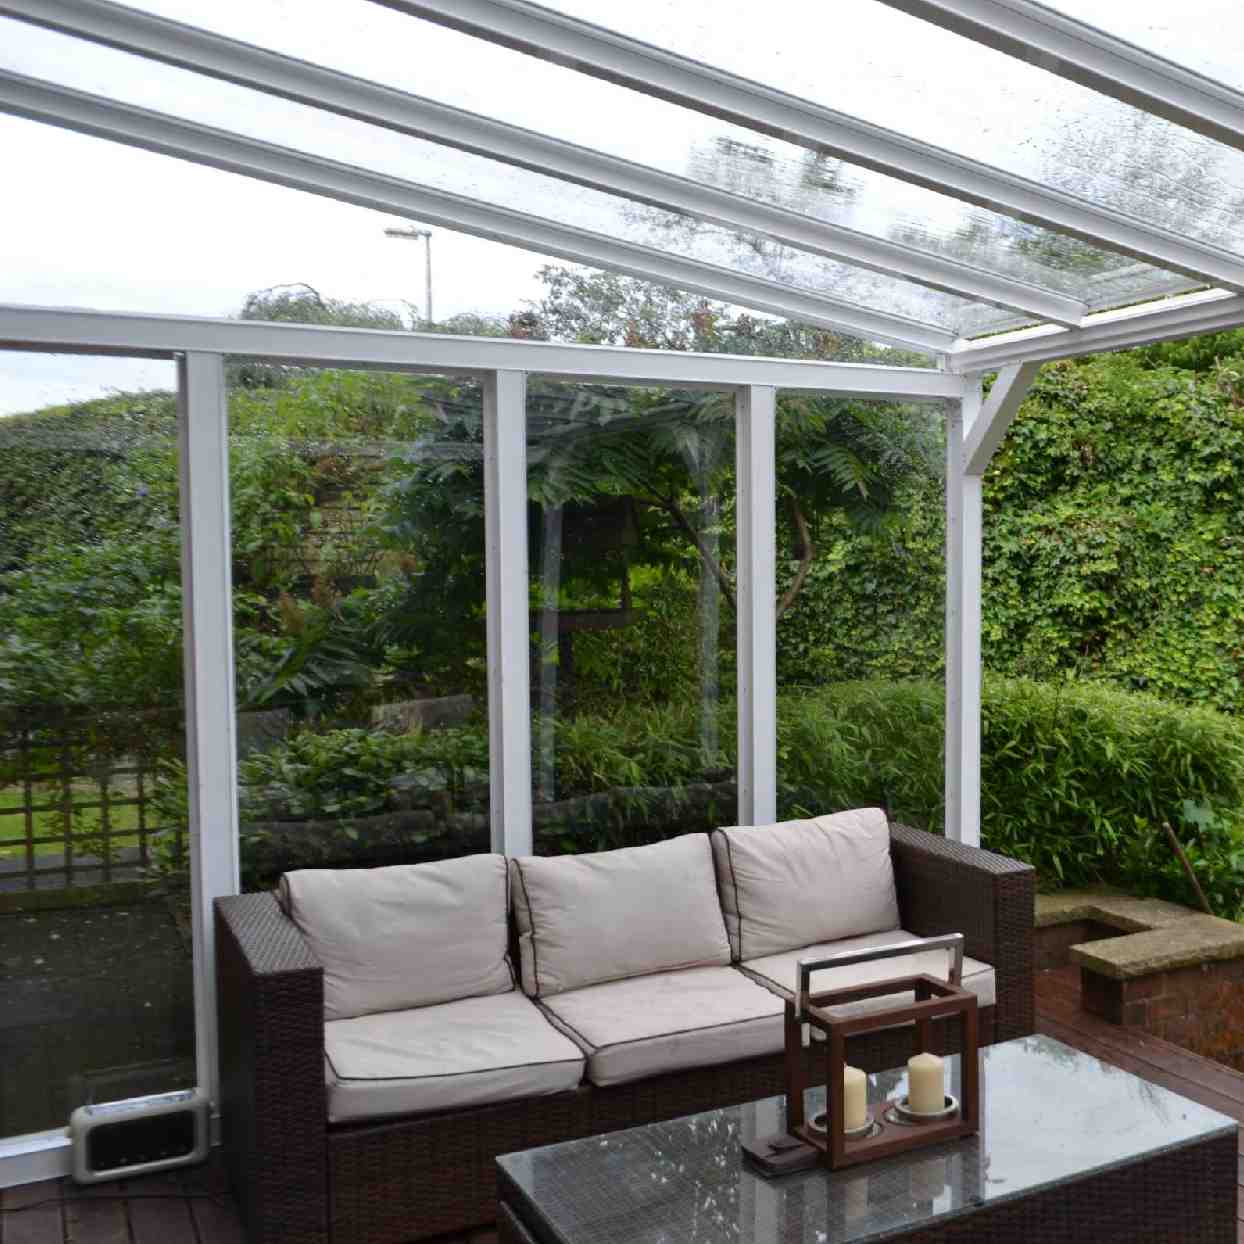 Buy Omega Verandah White with 6mm Glass Clear Plate Polycarbonate Glazing - 5.6m (W) x 3.5m (P), (3) Supporting Posts online today